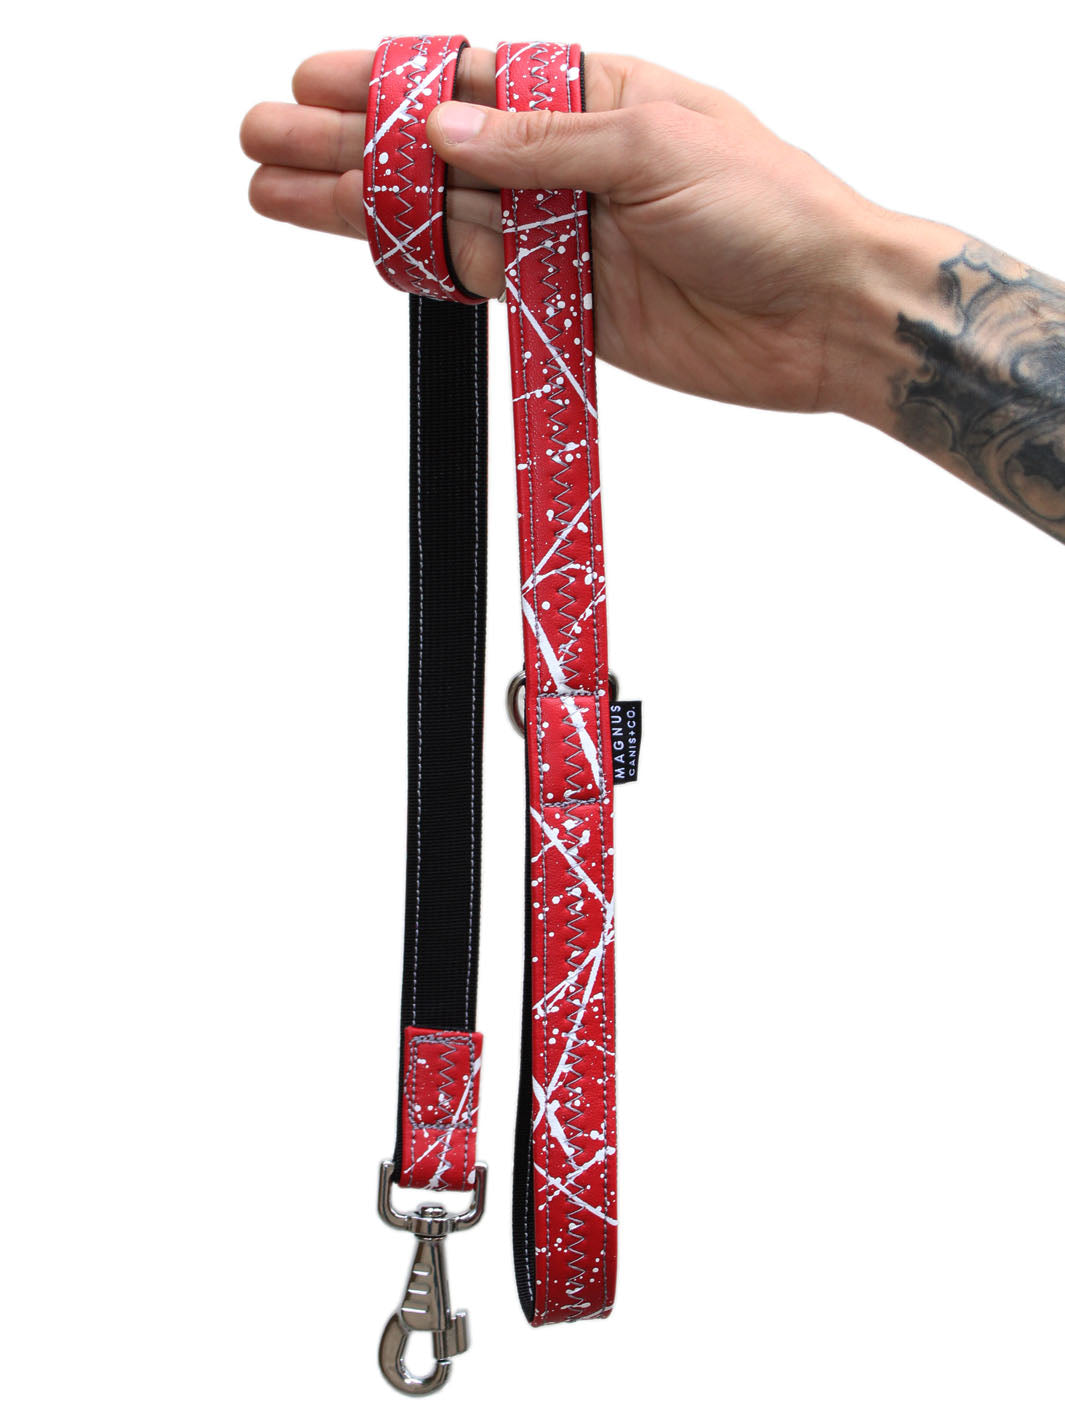 A red vegan leather dog leash with white hand painted pattern by MAGNUS Canis.